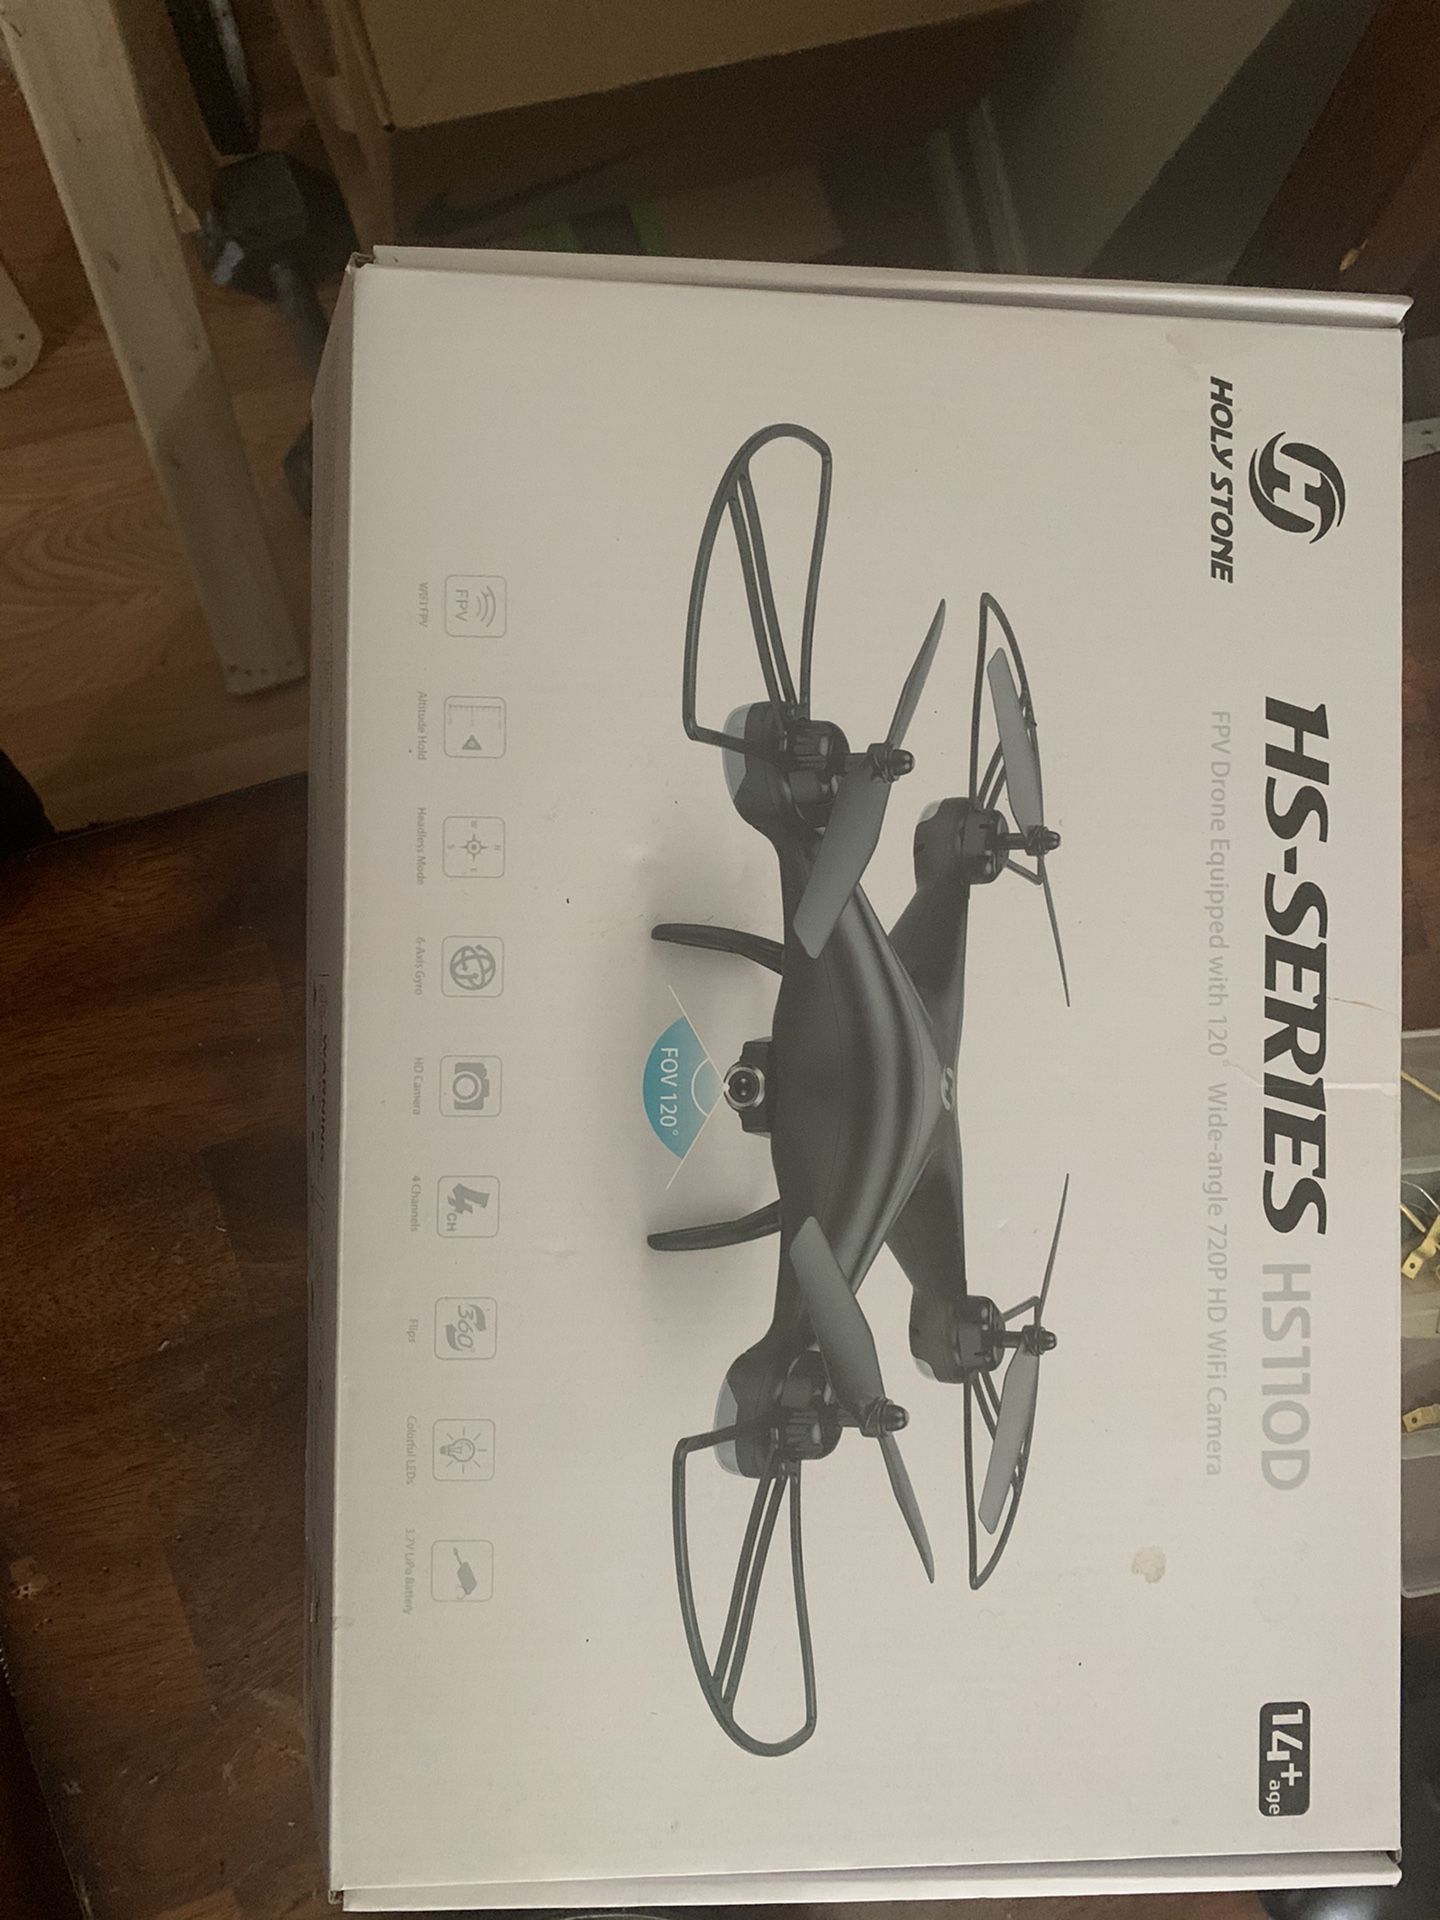 He series drone hs110